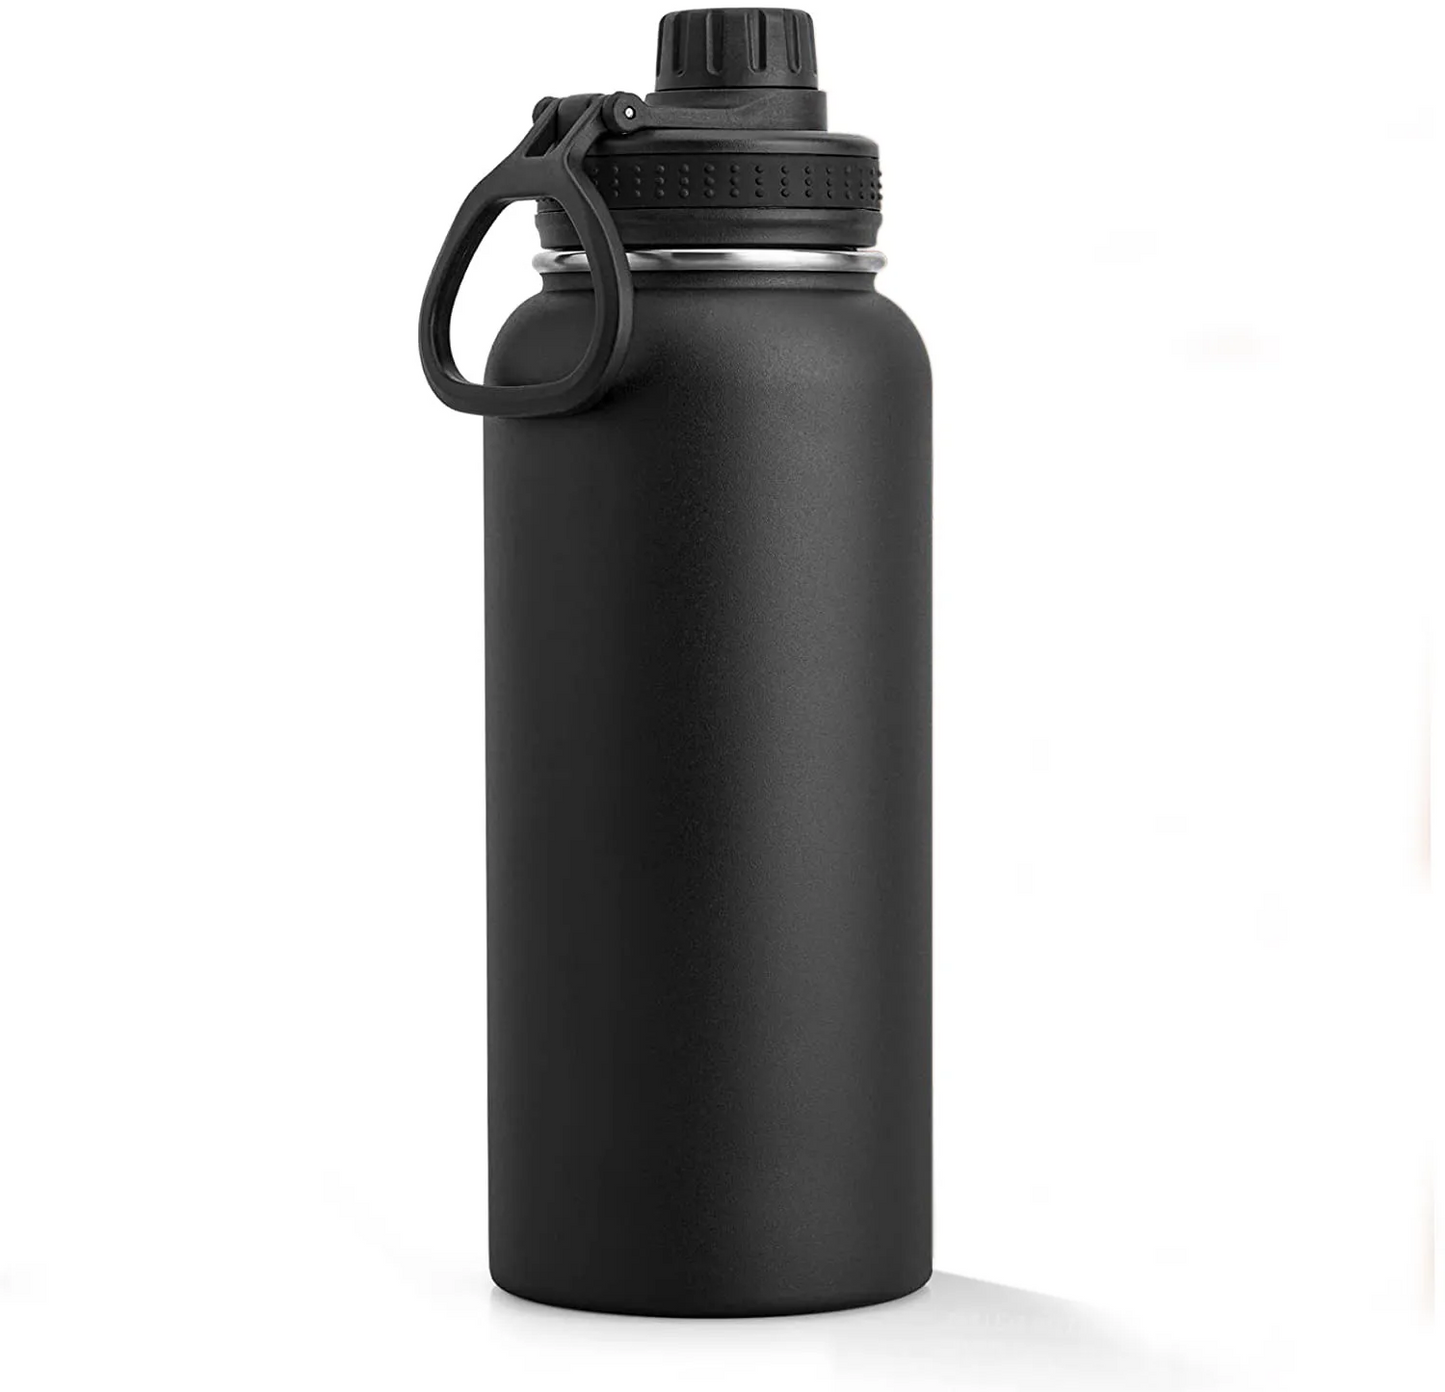 Image for 32 oz or 1000 ML stainless steel water bottle in black color, with double wall vacuum insulation. The bottle has dual lid with built-in carrying handle. The top smaller lid opens up and remains attached to let you drink from the bottle.